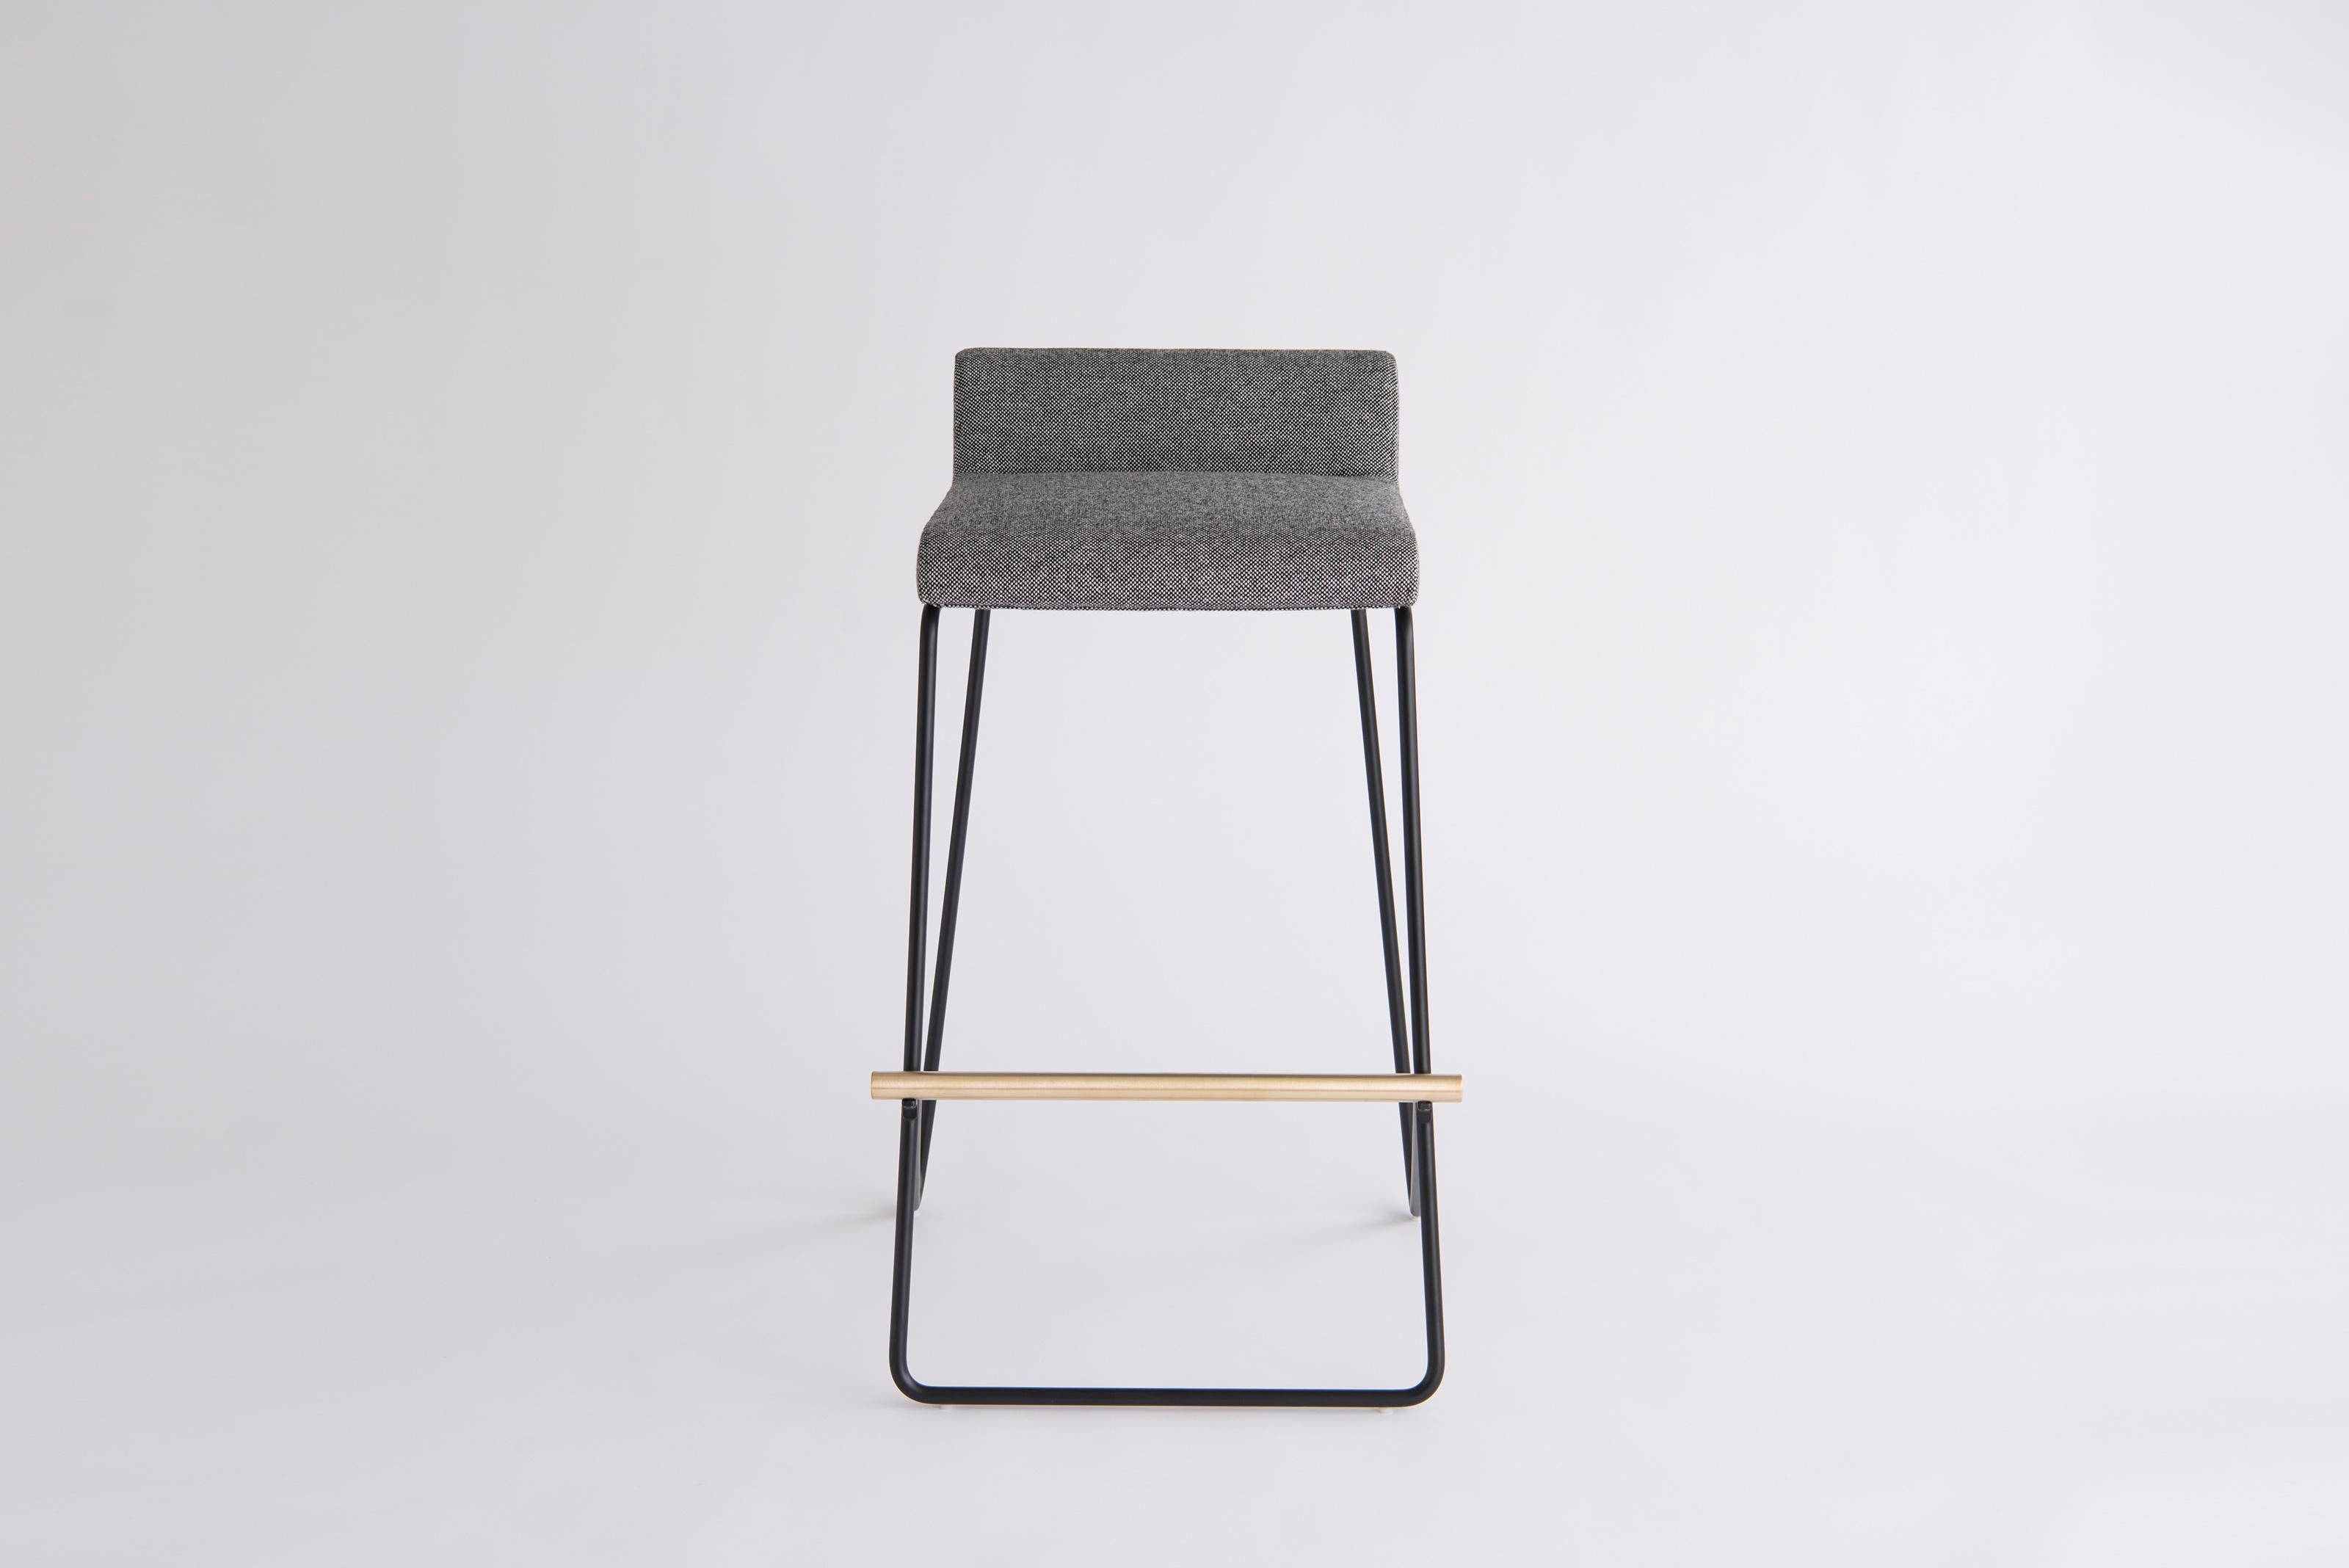 Kickstand Bar Stool by Phase Design
Dimensions: D 59.1 x W 55.2 x H 88.9 cm. 
Materials: Upholstery, powder-coated metal and brushed brass.

Solid steel bar available in a flat black or white powder coat finish with solid brushed brass bar and